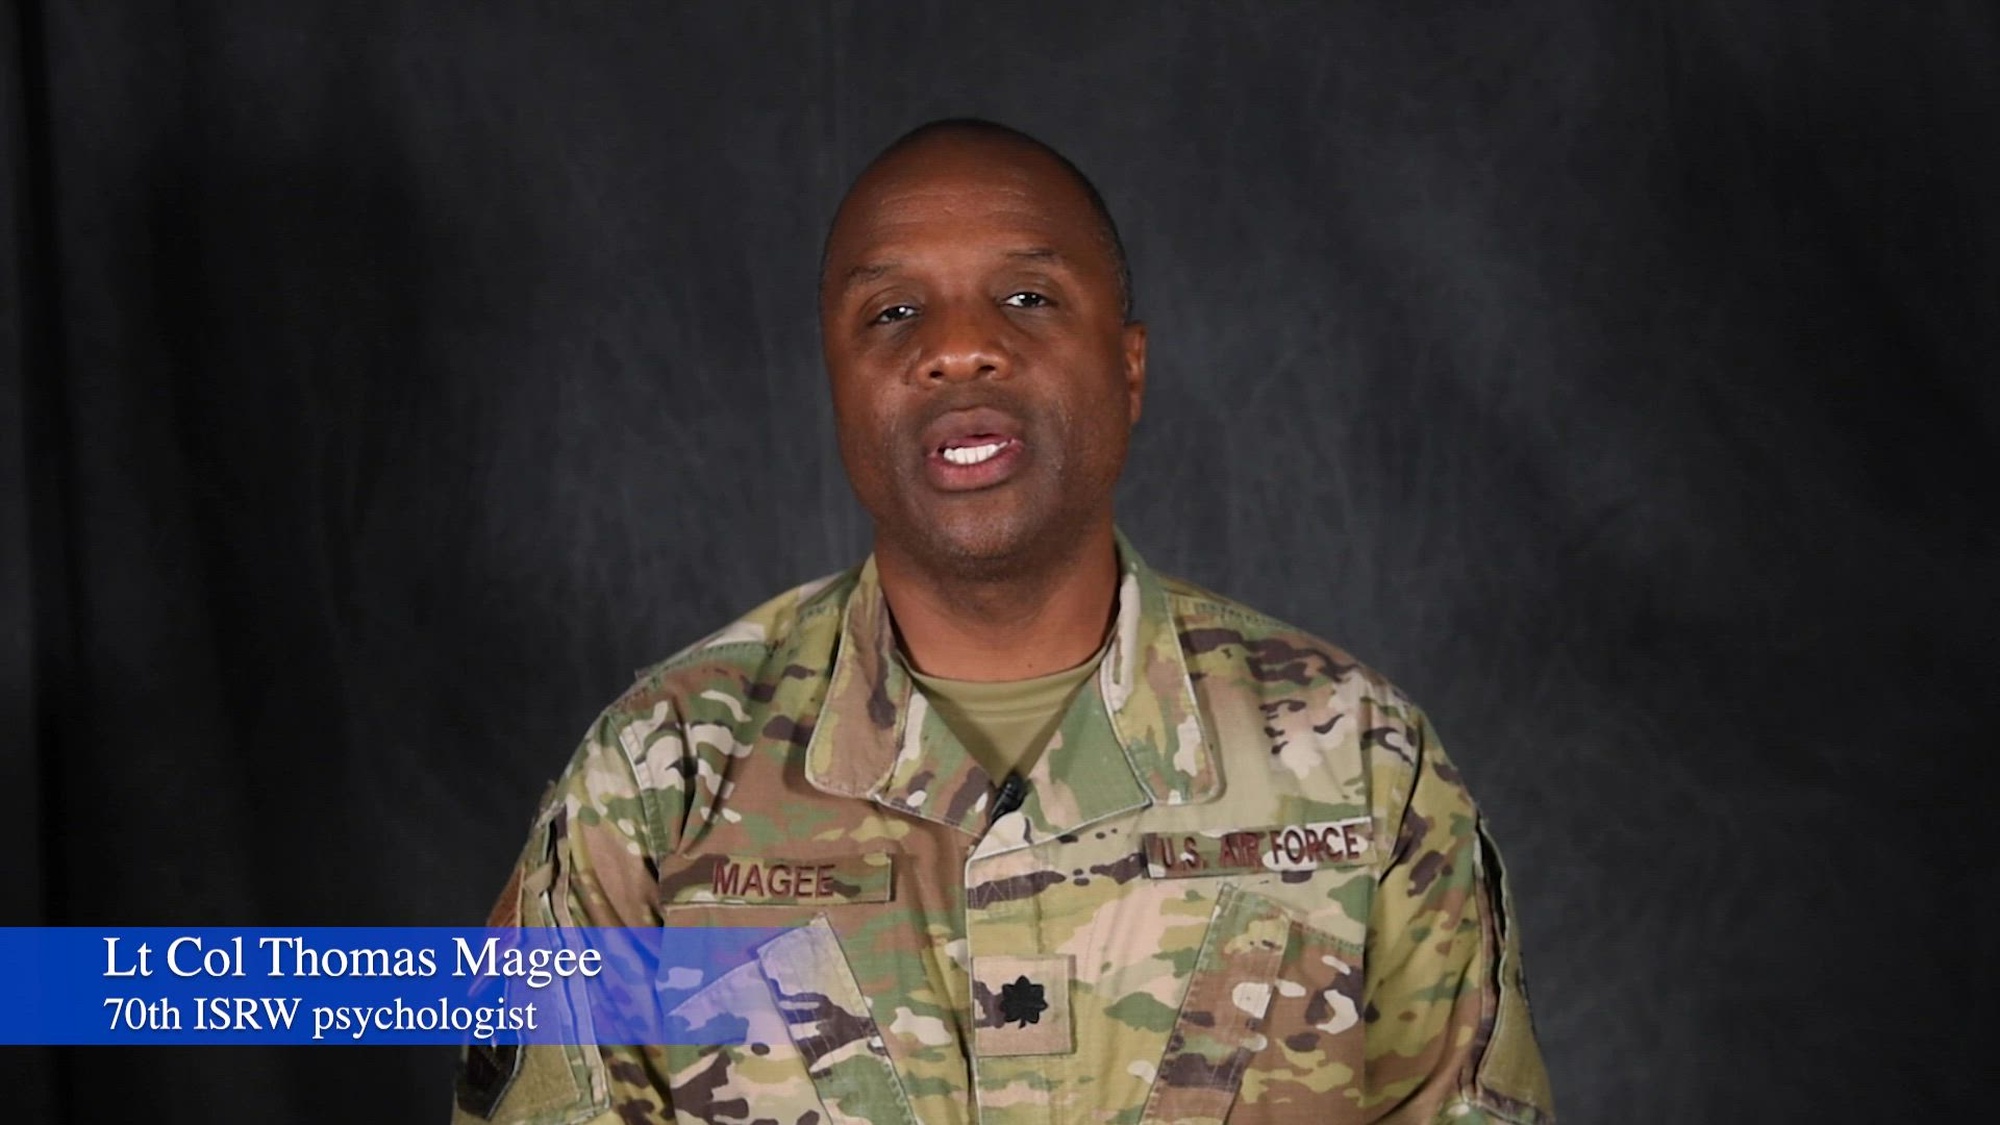 The 70th ISRW psychologist, Lt. Col. Thomas Magee shares a message about the importance of mental health.